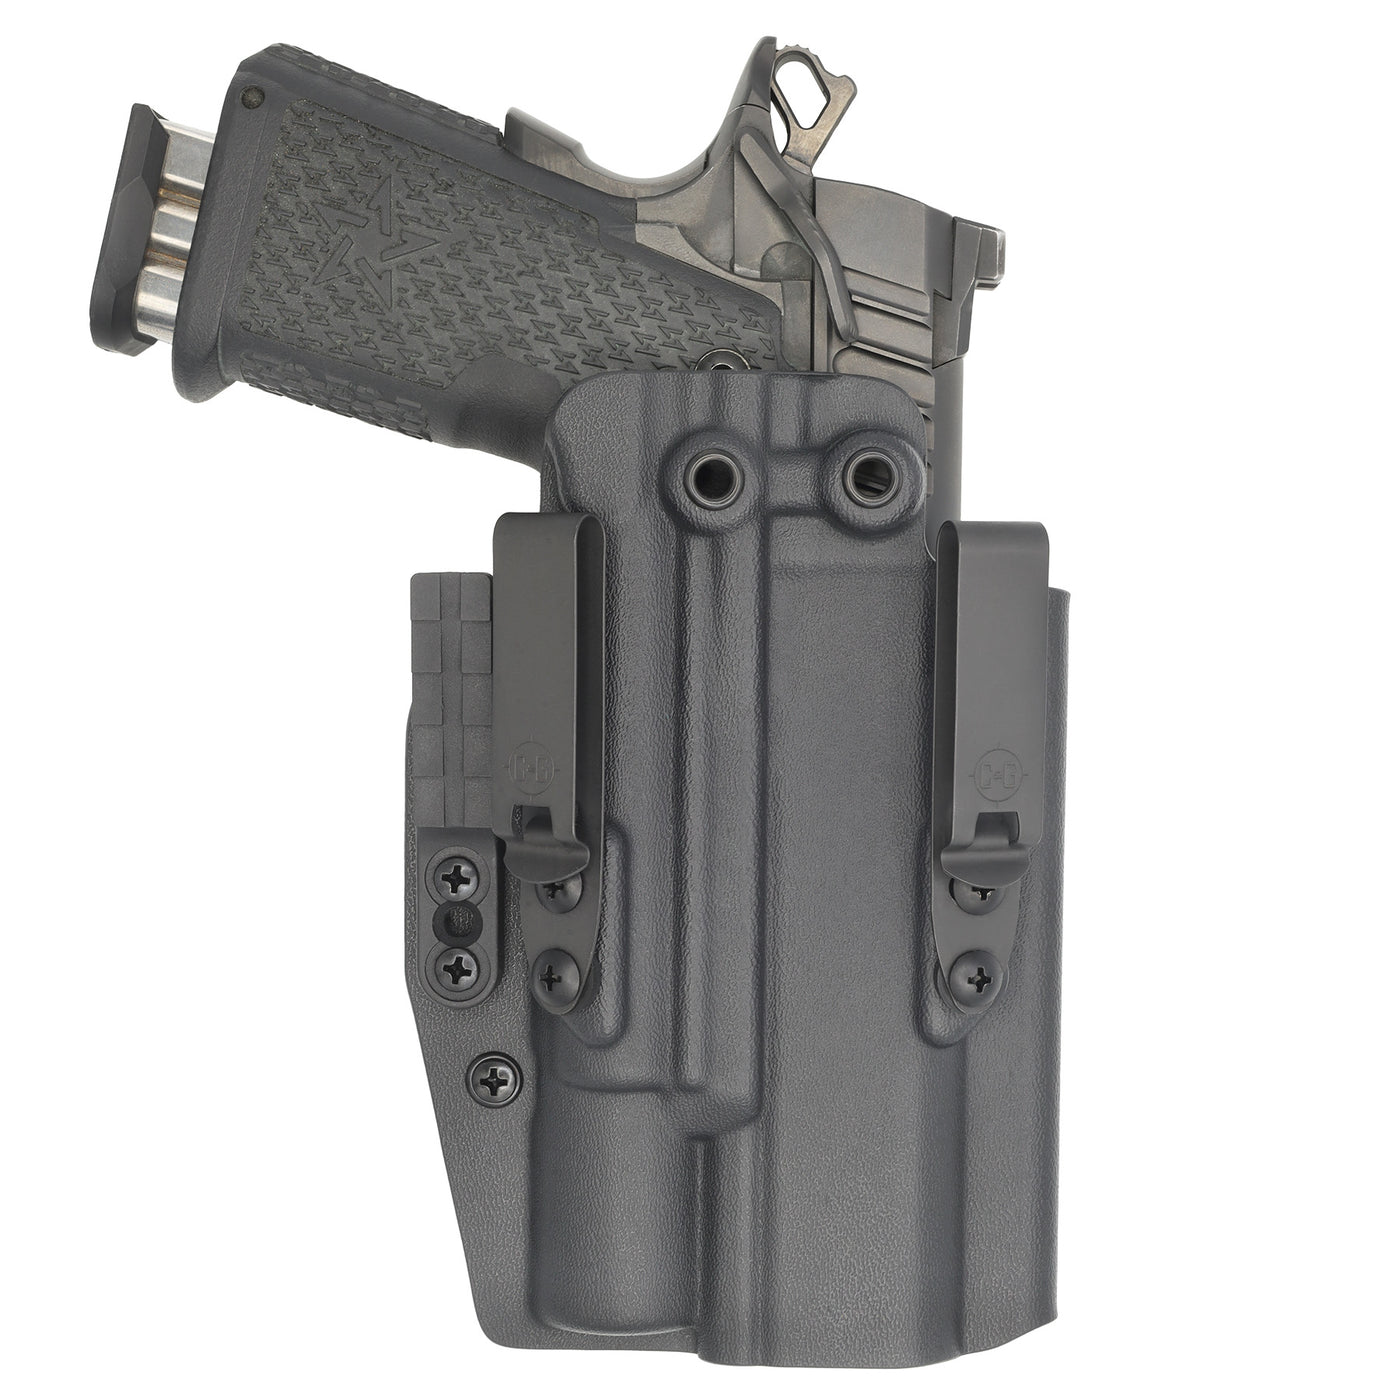 C&G Holsters Quickship IWB ALPHA UPGRADE Tactical 1911 Surefire X300 in holstered position